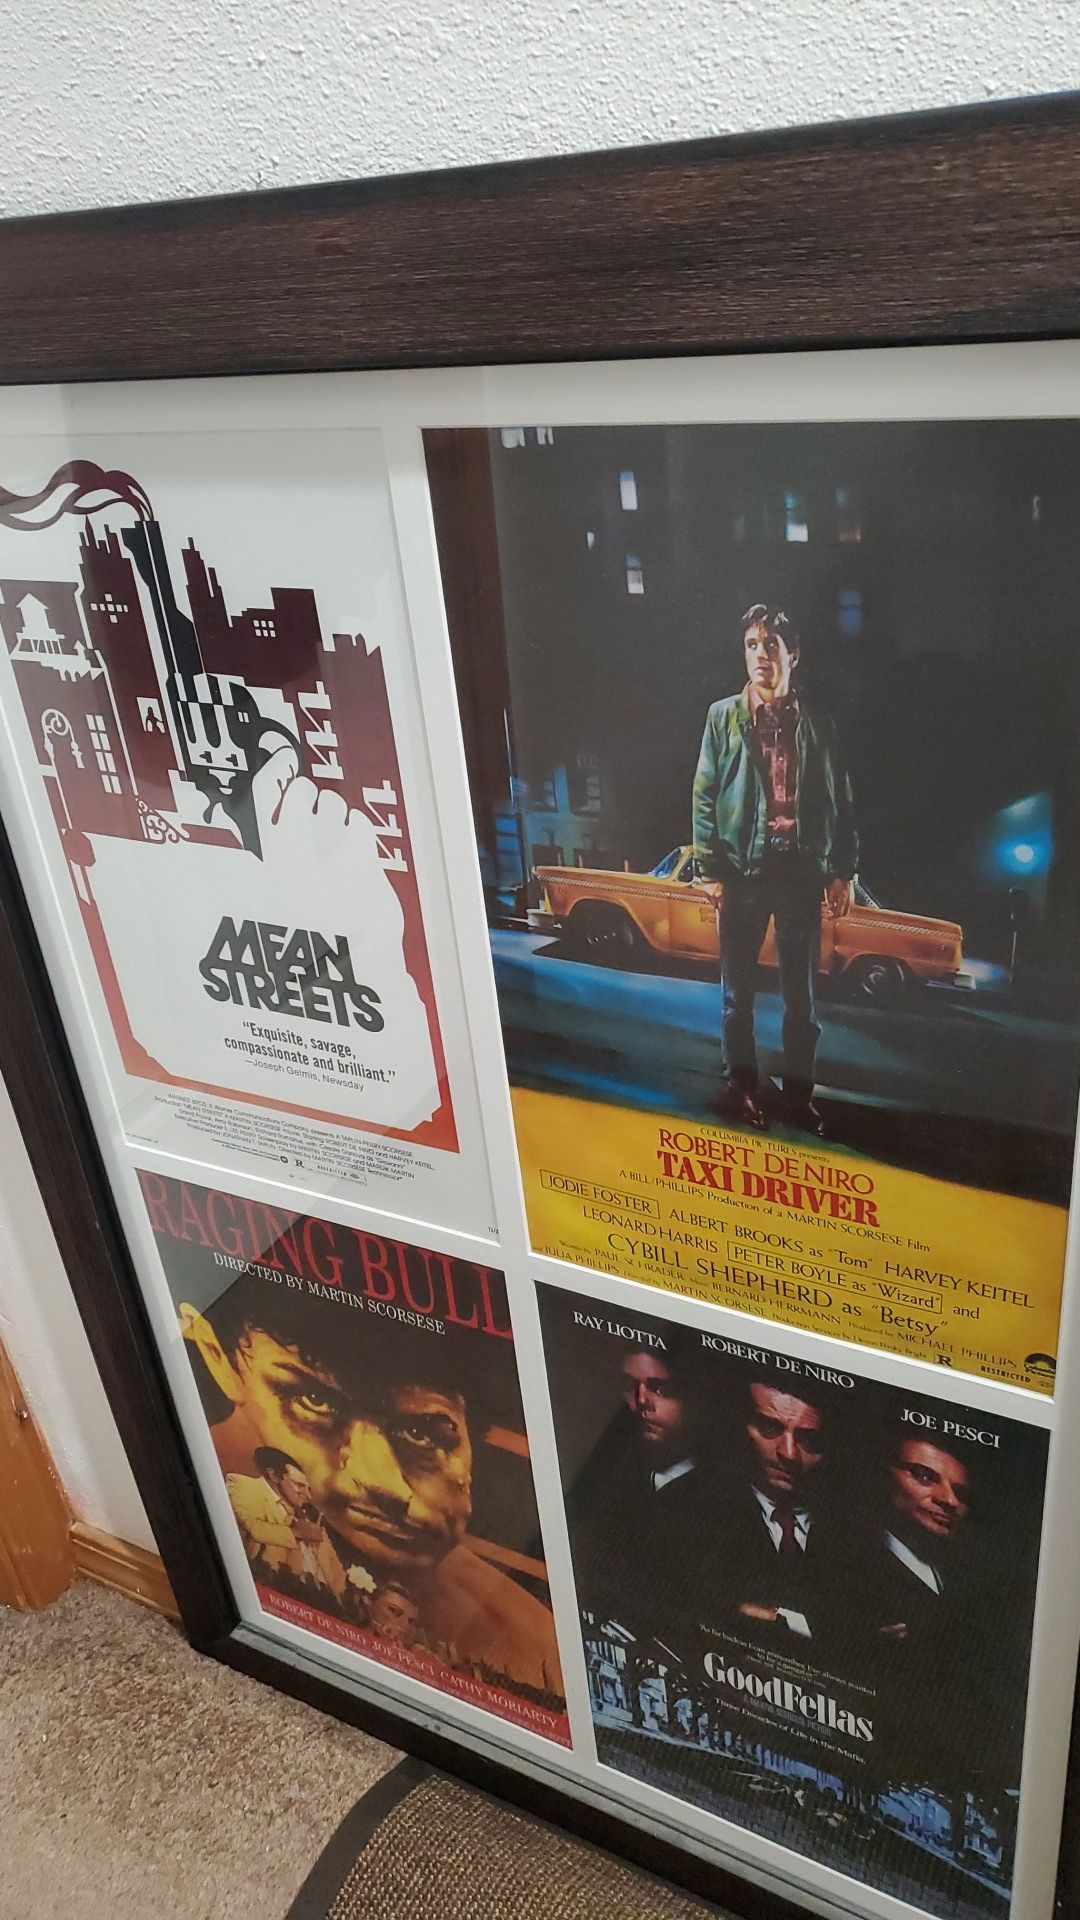 deniro/ Scorsese 4 film poster set, matted and framed, 17x11 movie posters 4 in 1, approx 38x26